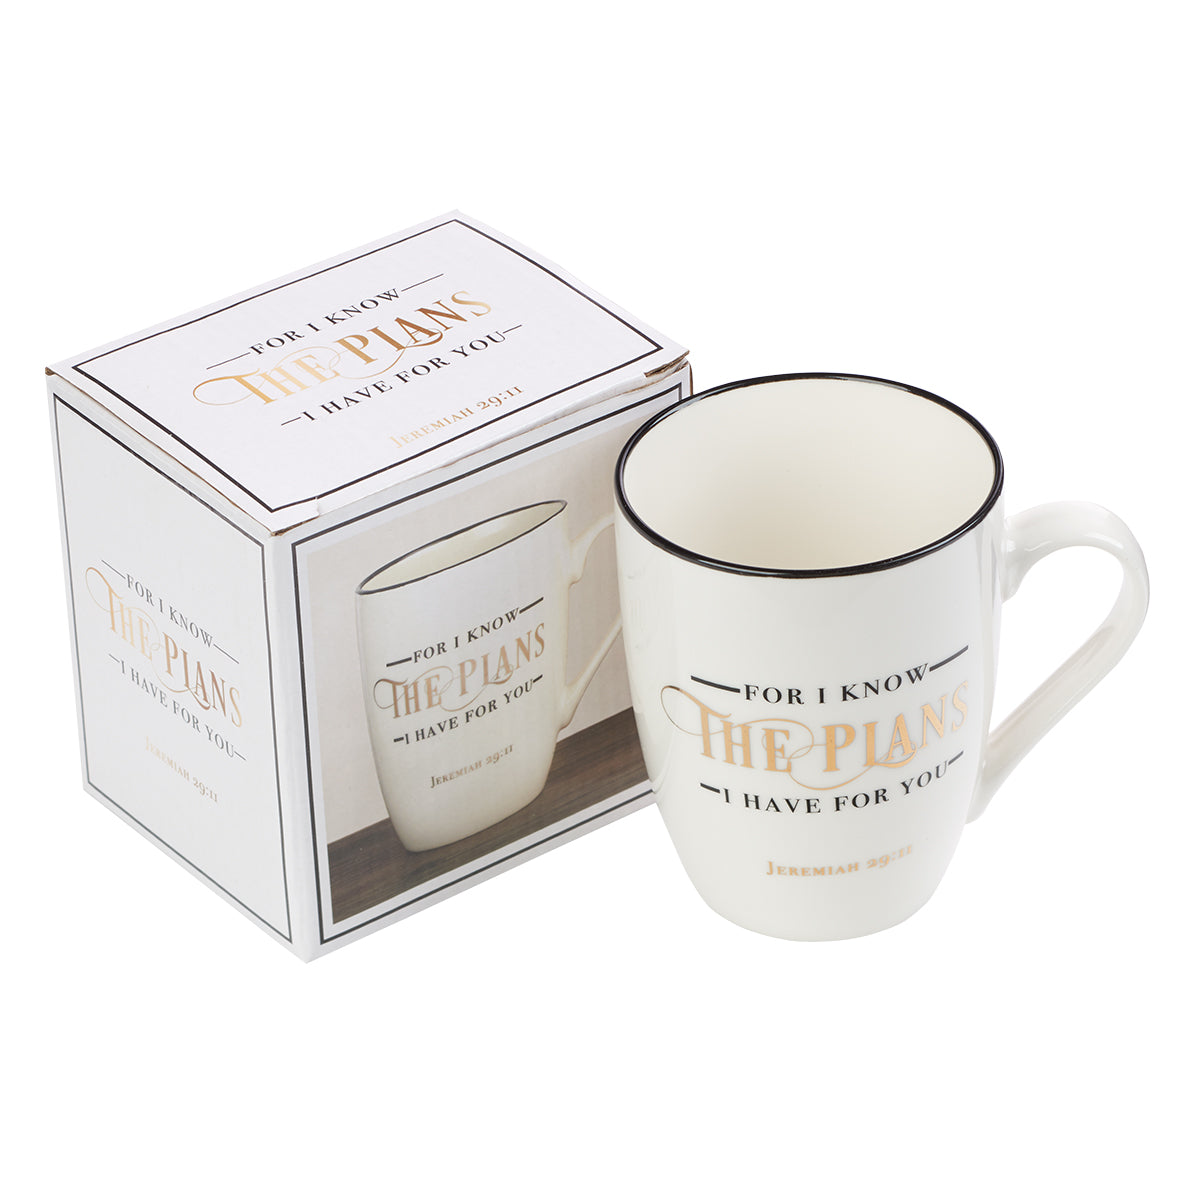 Image of I Know The Plans Coffee Mug – Jeremiah 29:11 other